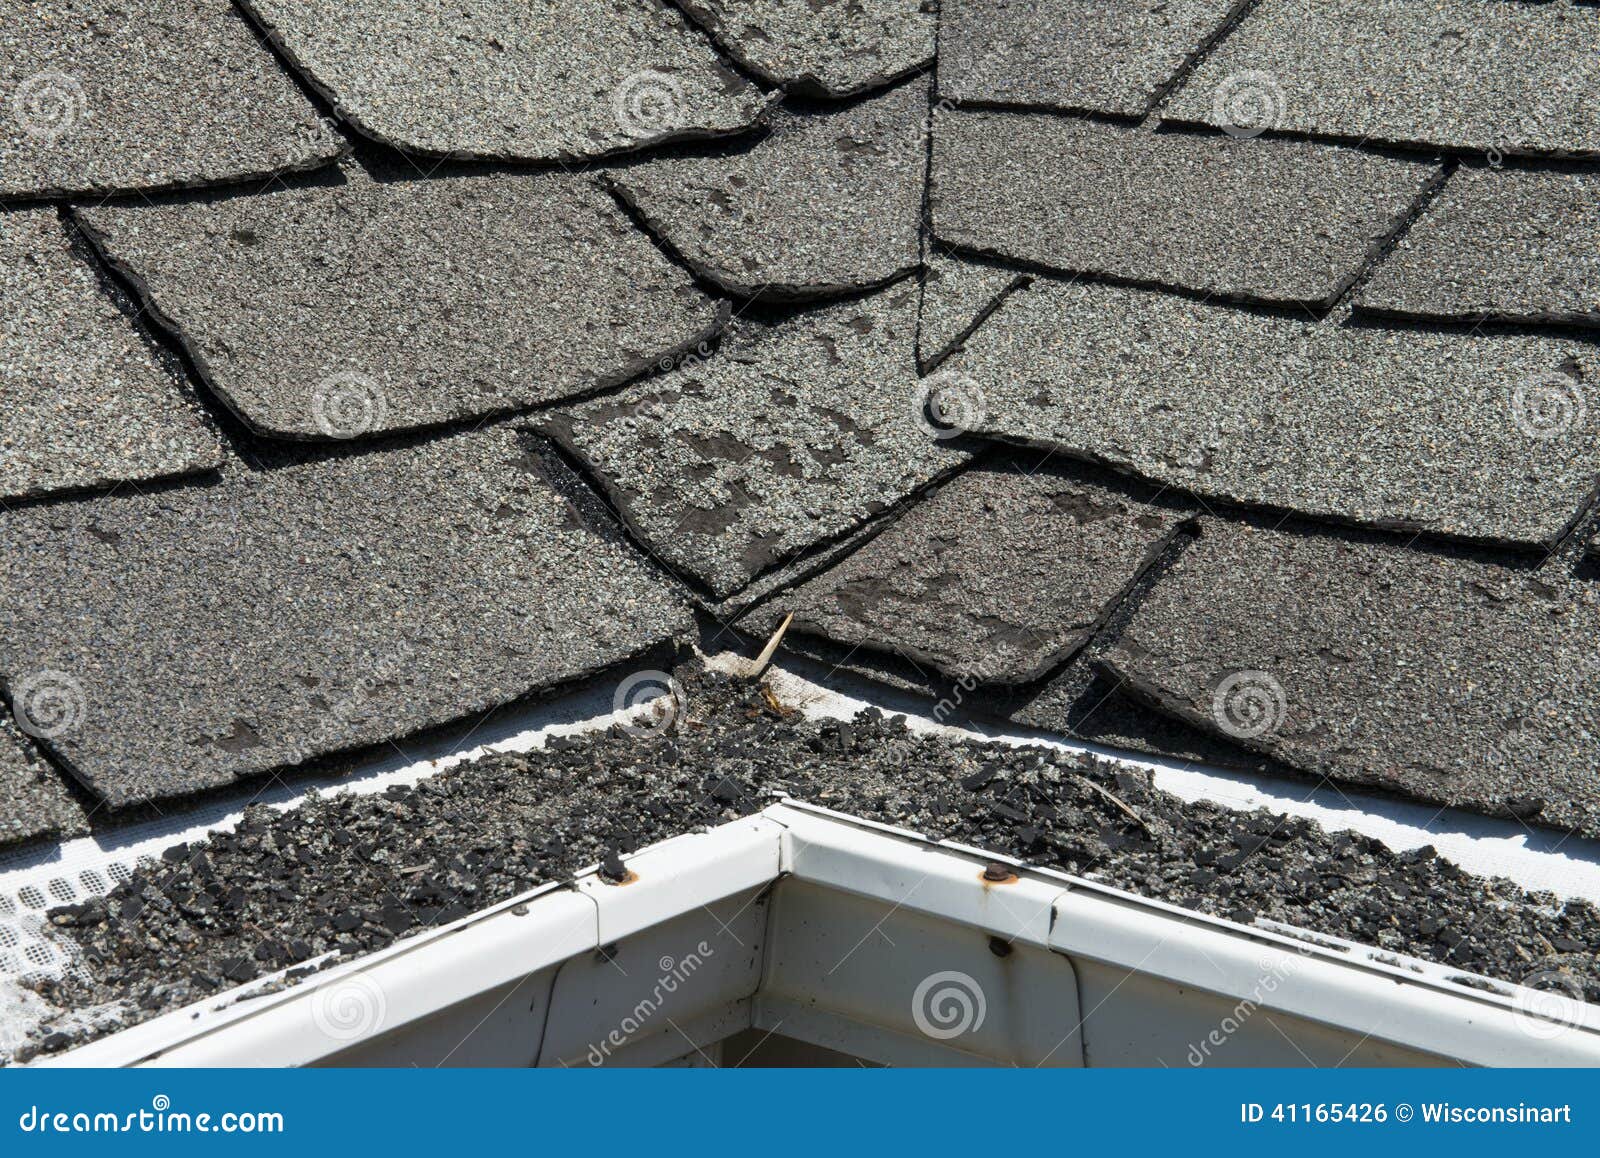 old bad and curling roof shingles on a house or home